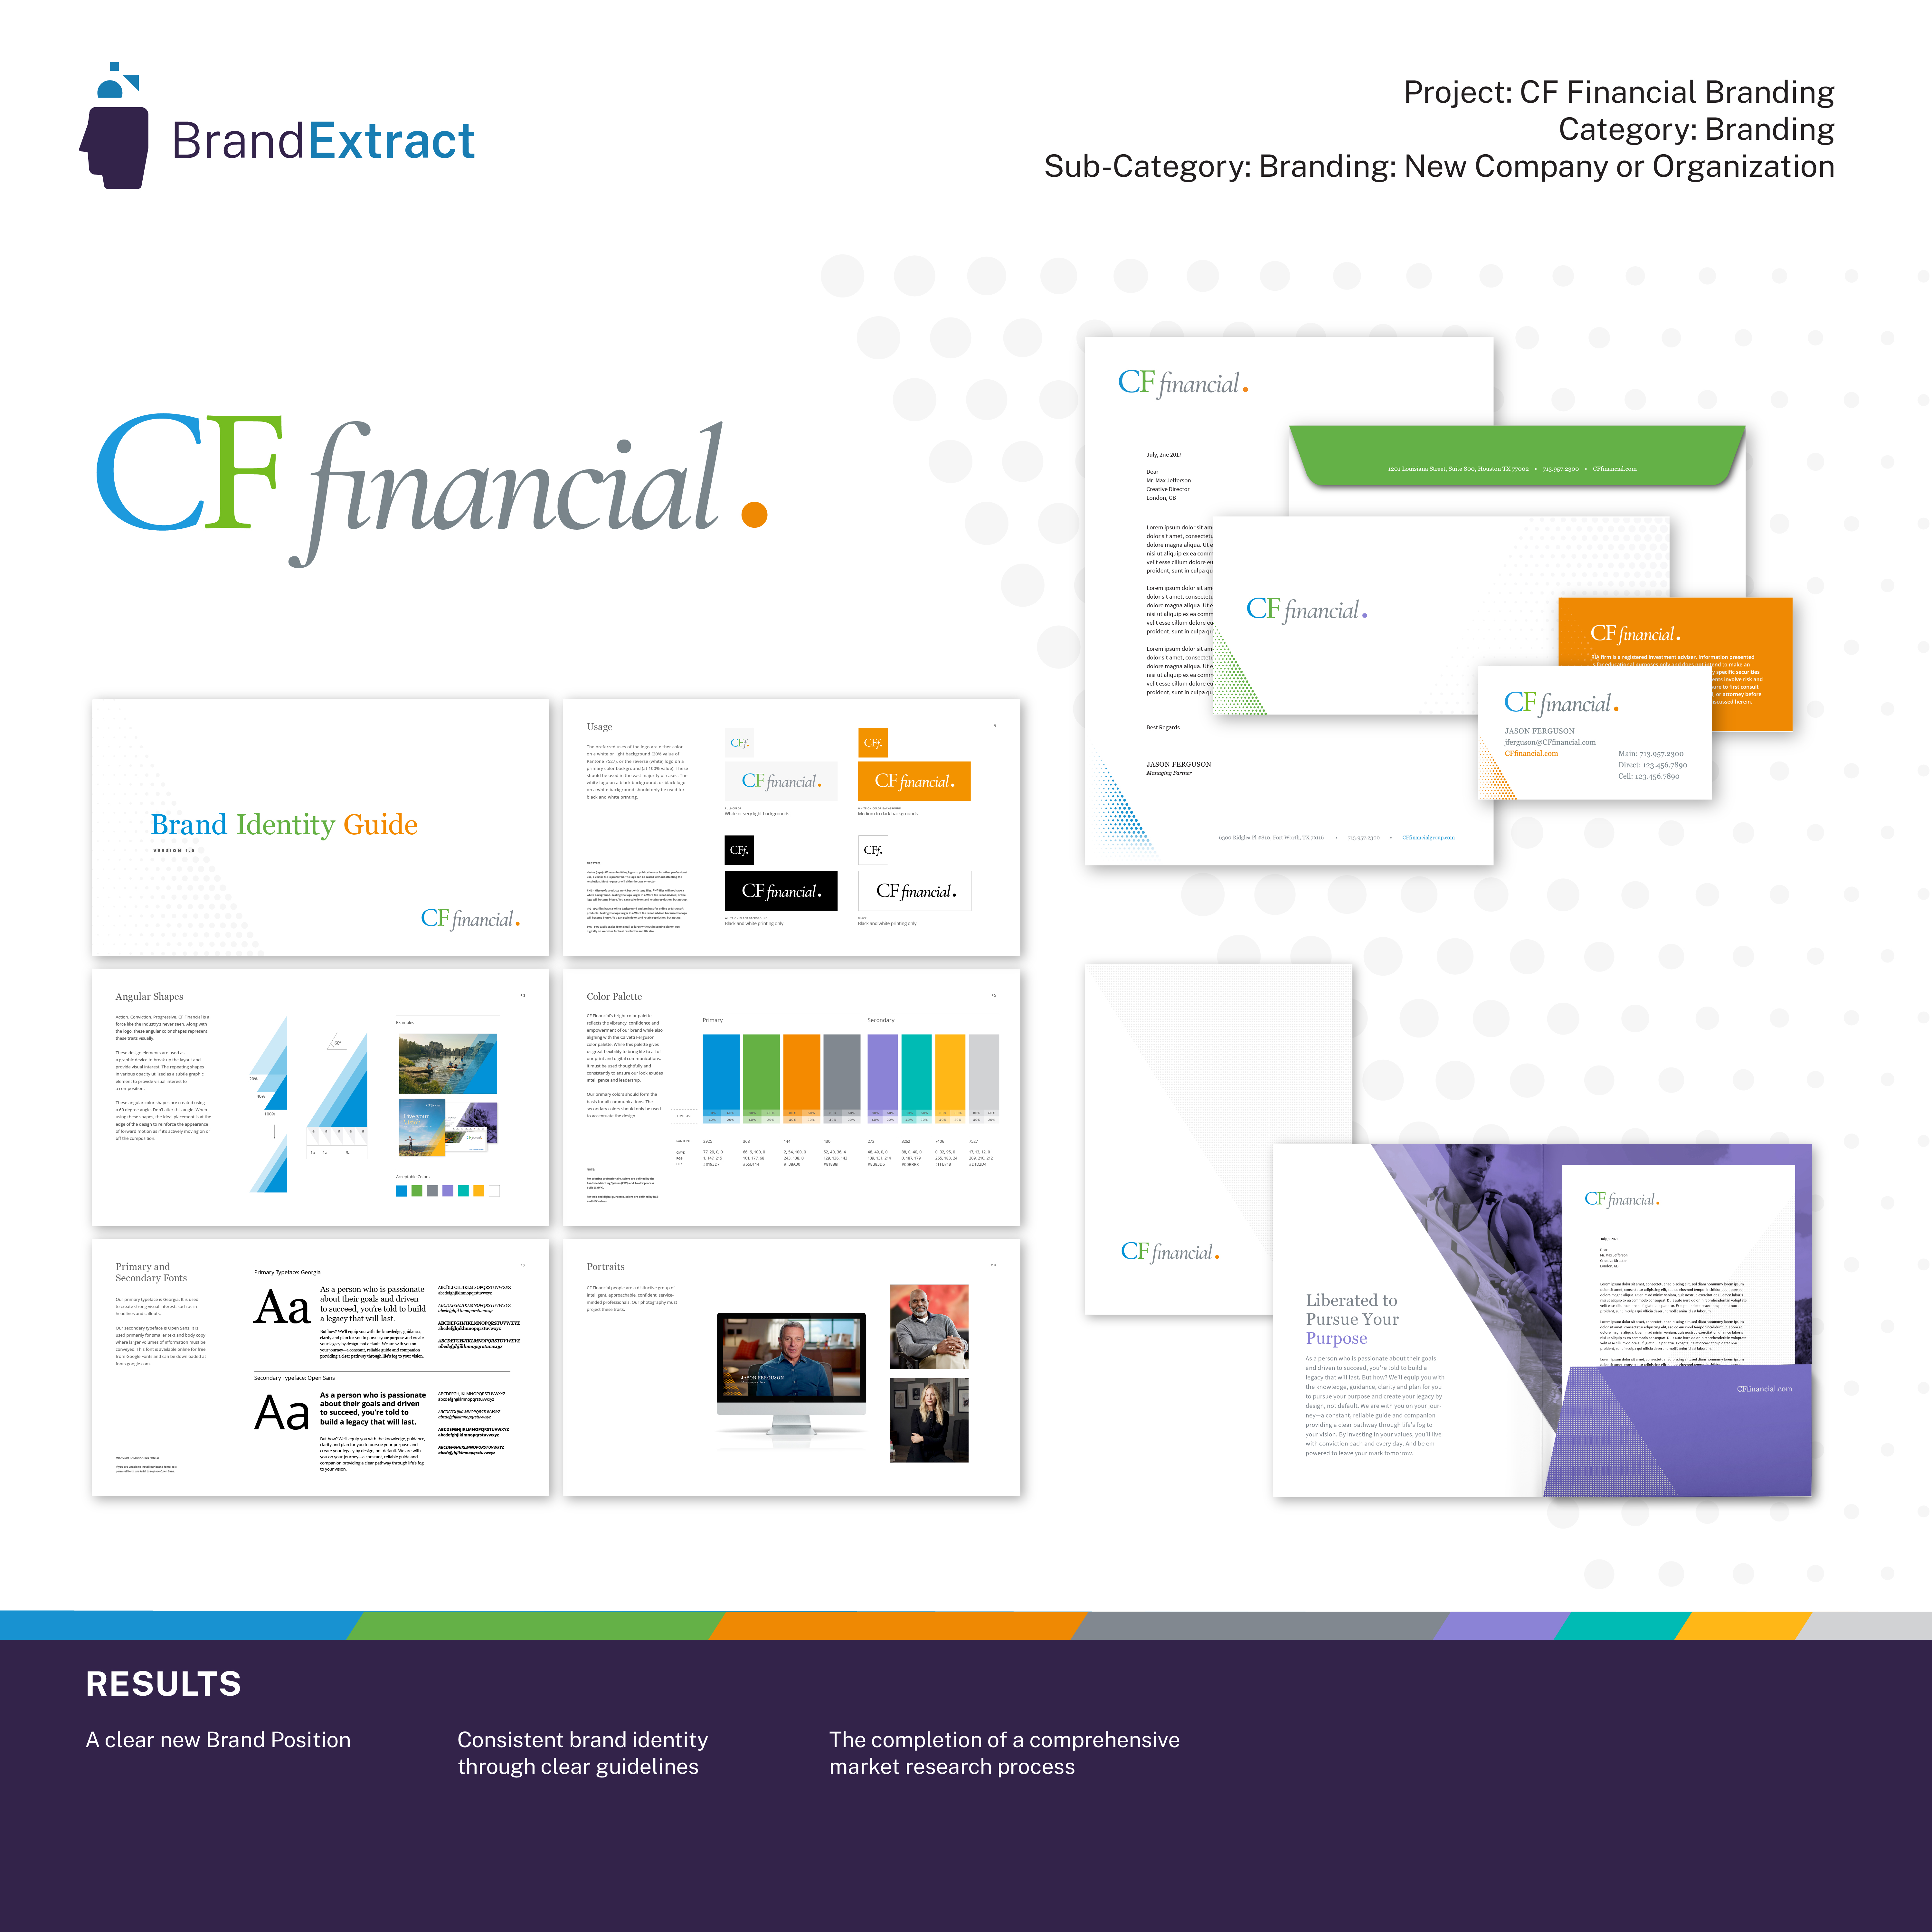 CF Financial assets combined for award submissions